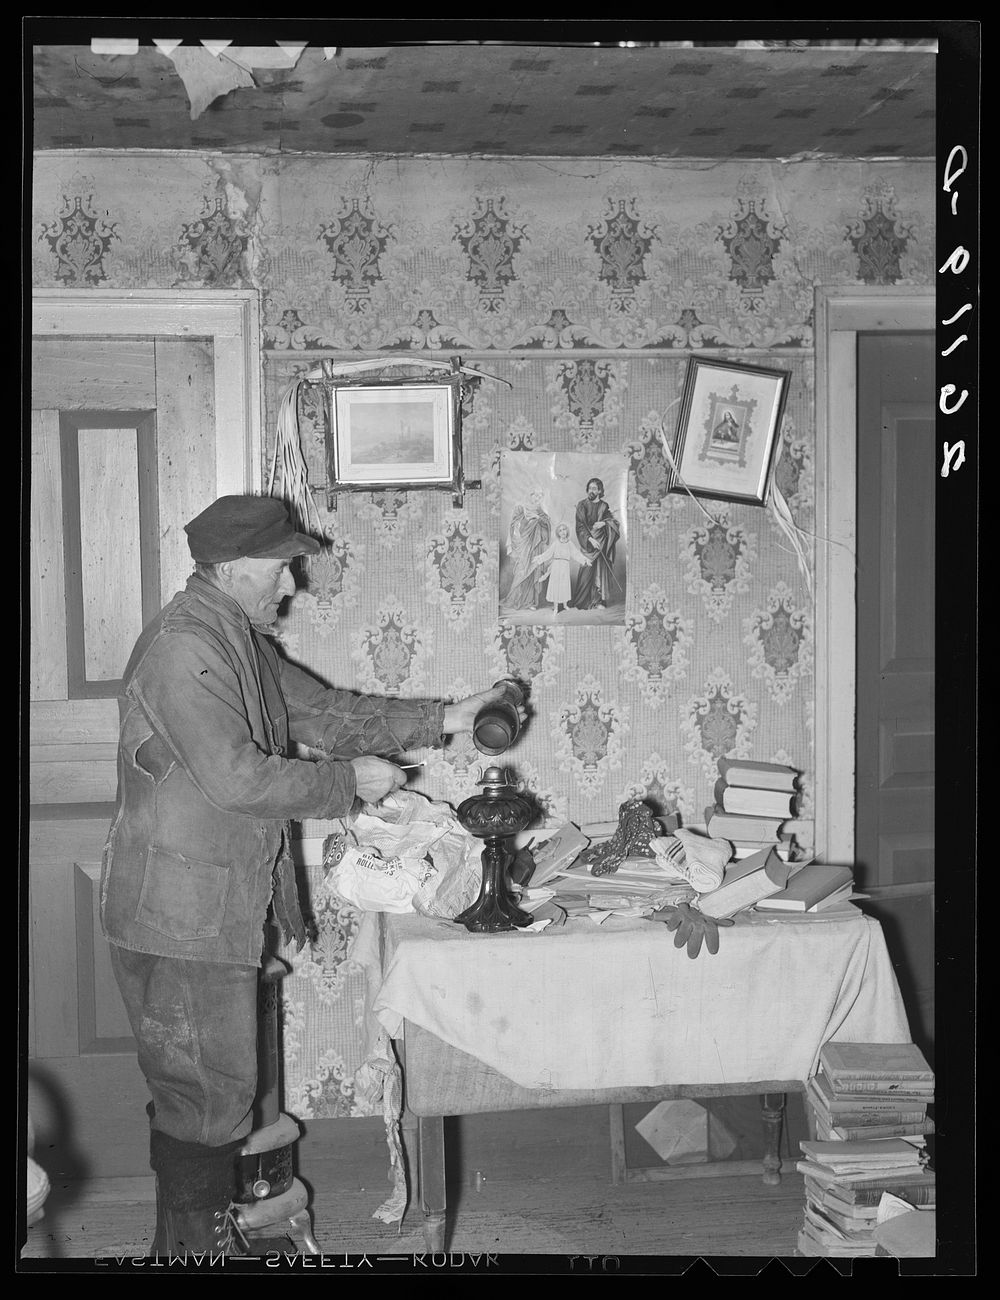 John Dudeck lighting a lamp in his home. Dalton, New York, Allegany County. Sourced from the Library of Congress.